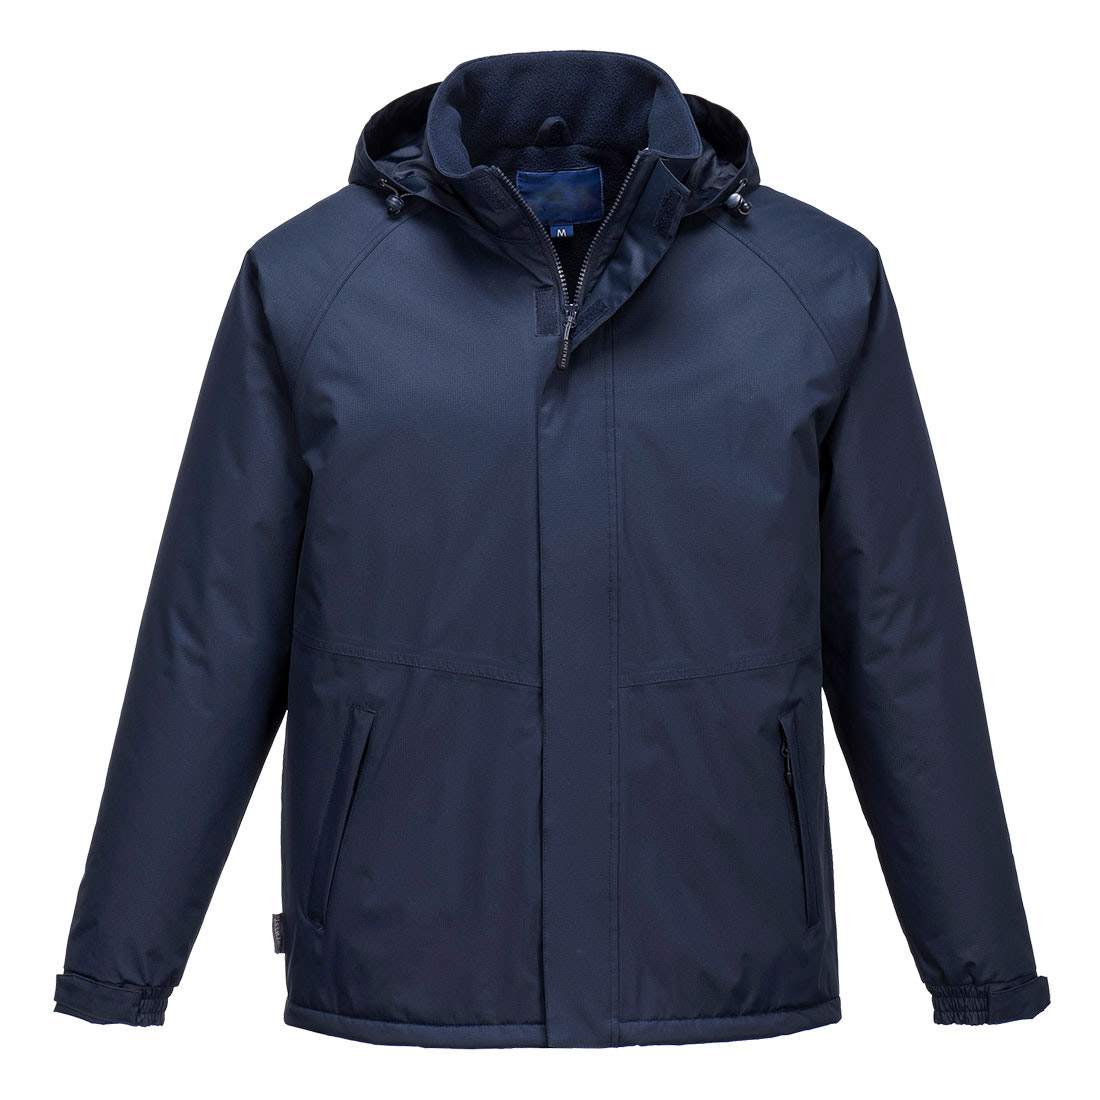 Limax Insulated Jacket